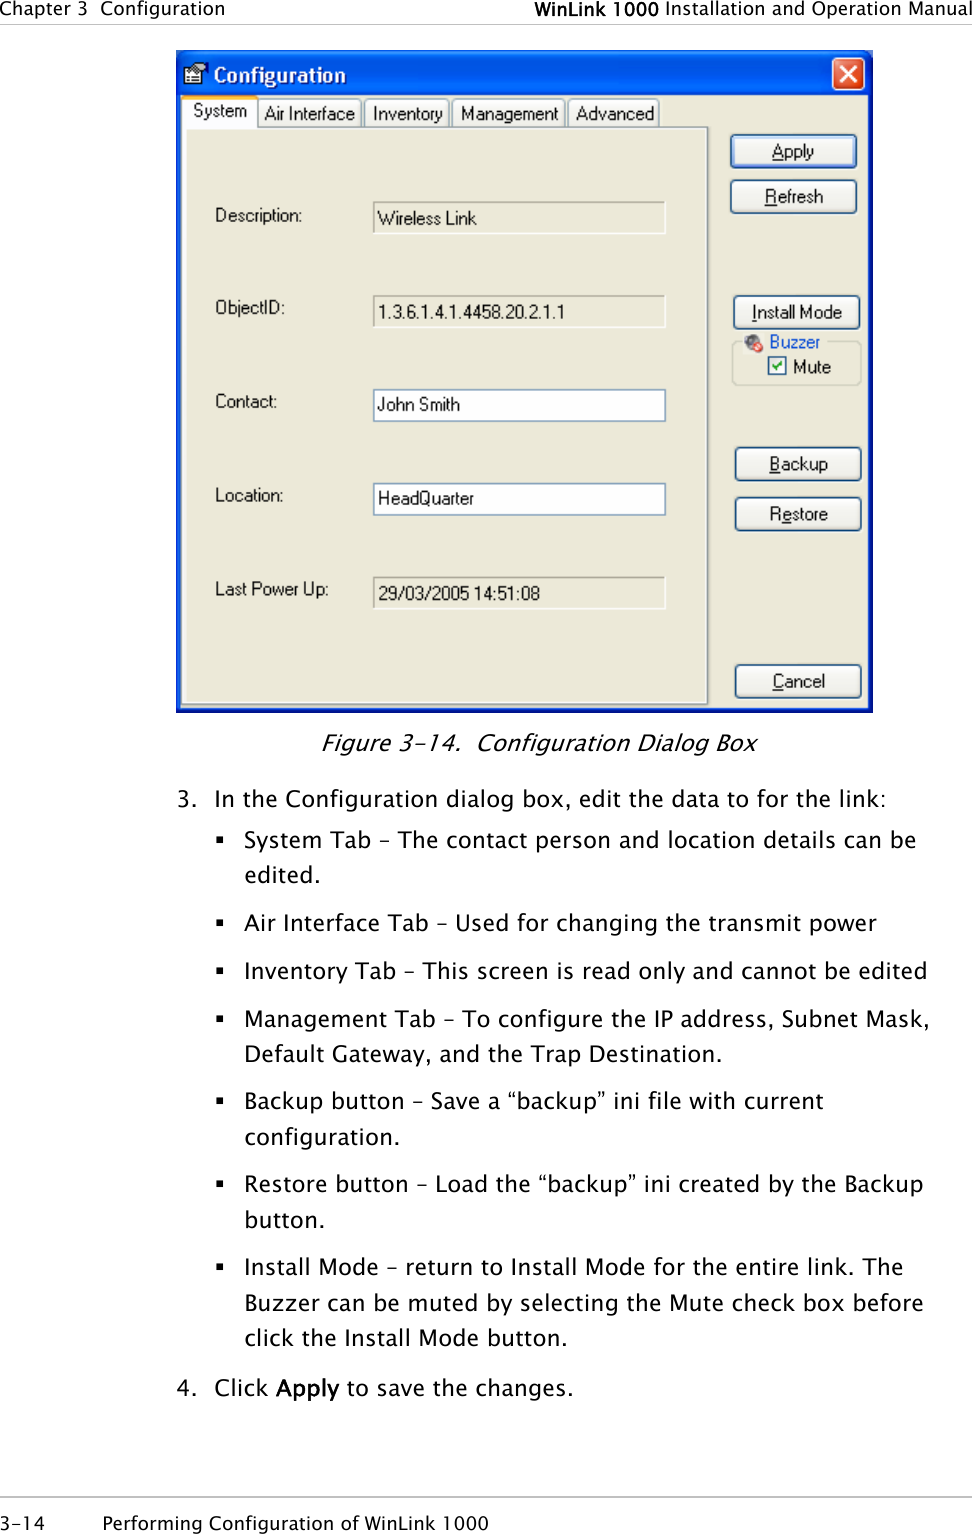 Chapter 3  Configuration  WinLink 1000 Installation and Operation Manual  Figure 3-14.  Configuration Dialog Box 3. In the Configuration dialog box, edit the data to for the link:  System Tab – The contact person and location details can be edited.  Air Interface Tab – Used for changing the transmit power   Inventory Tab – This screen is read only and cannot be edited  Management Tab – To configure the IP address, Subnet Mask, Default Gateway, and the Trap Destination.  Backup button – Save a “backup” ini file with current configuration.  Restore button – Load the “backup” ini created by the Backup button.  Install Mode – return to Install Mode for the entire link. The Buzzer can be muted by selecting the Mute check box before click the Install Mode button. 4. Click Apply to save the changes. 3-14  Performing Configuration of WinLink 1000  